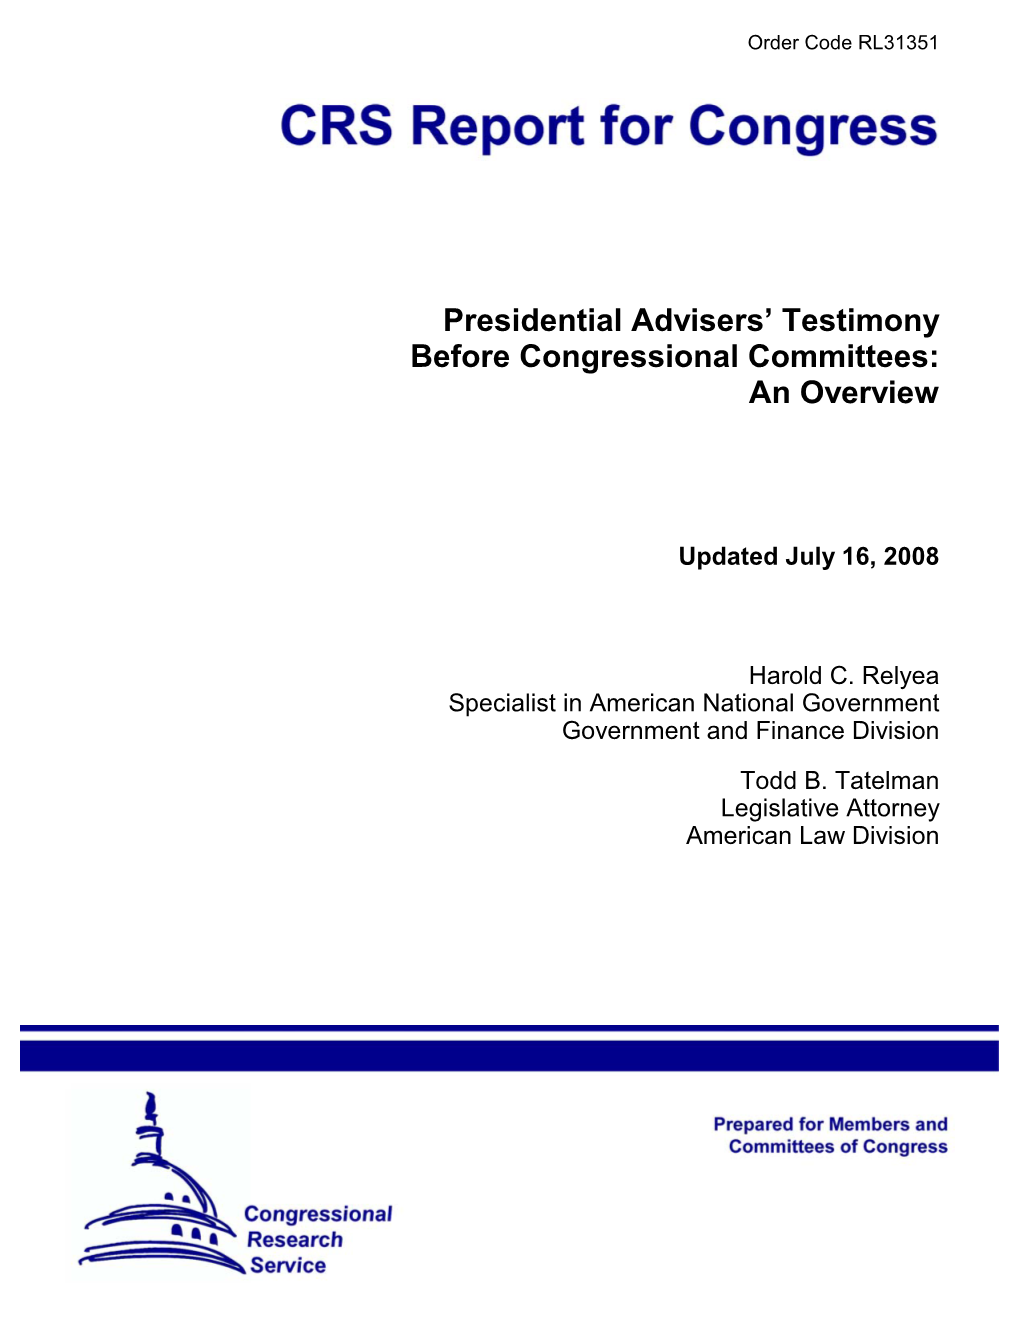 Presidential Advisers' Testimony Before Congressional Committees